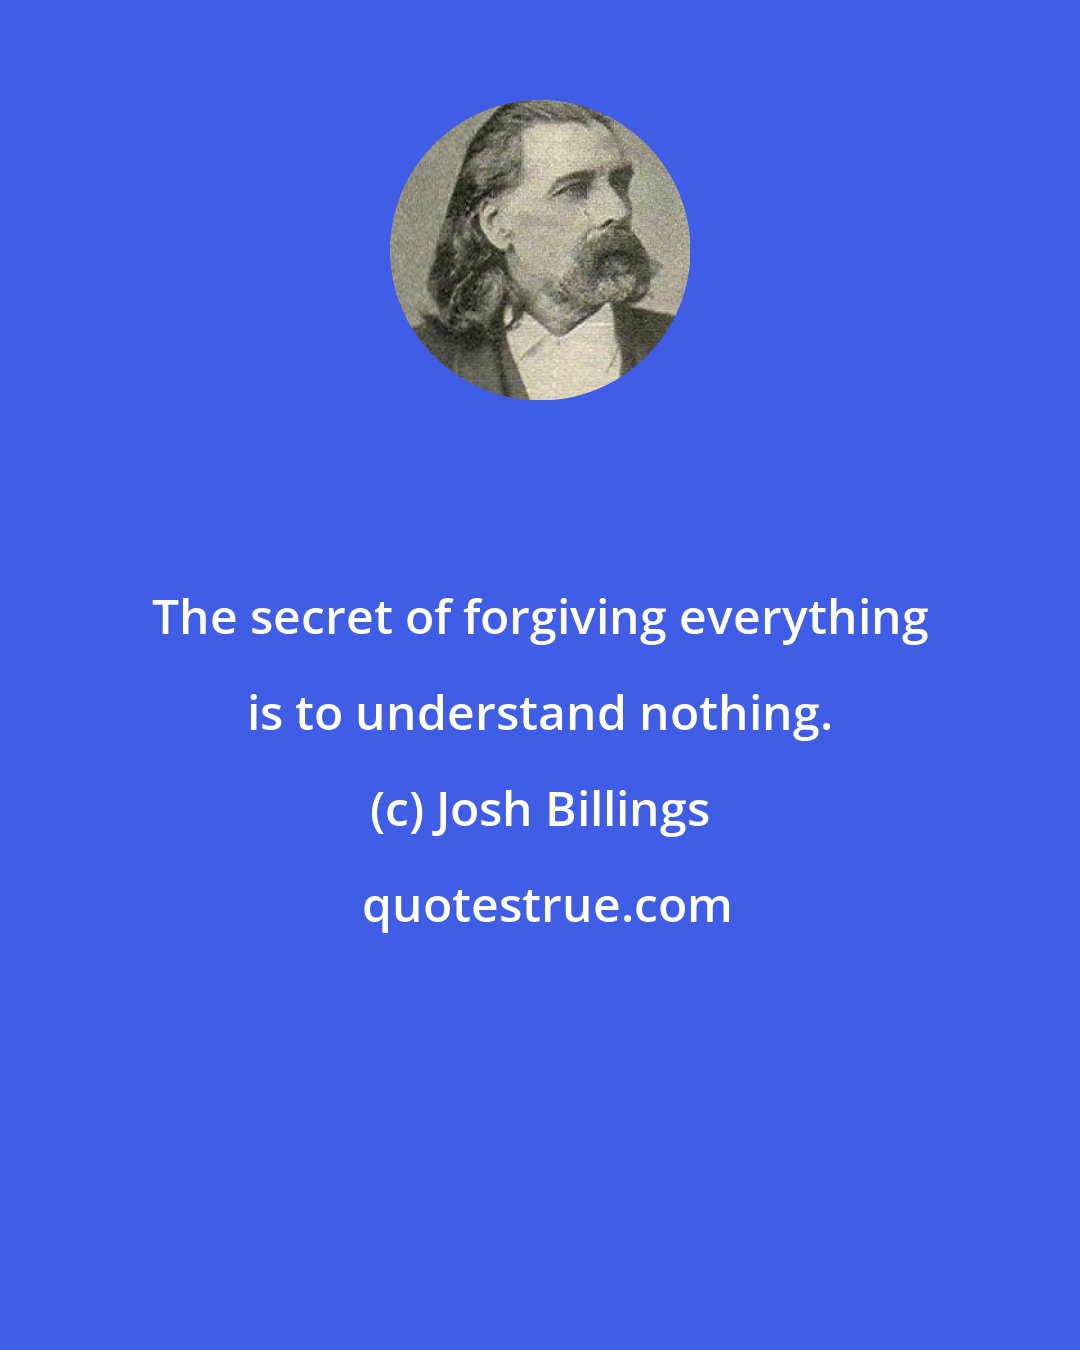 Josh Billings: The secret of forgiving everything is to understand nothing.